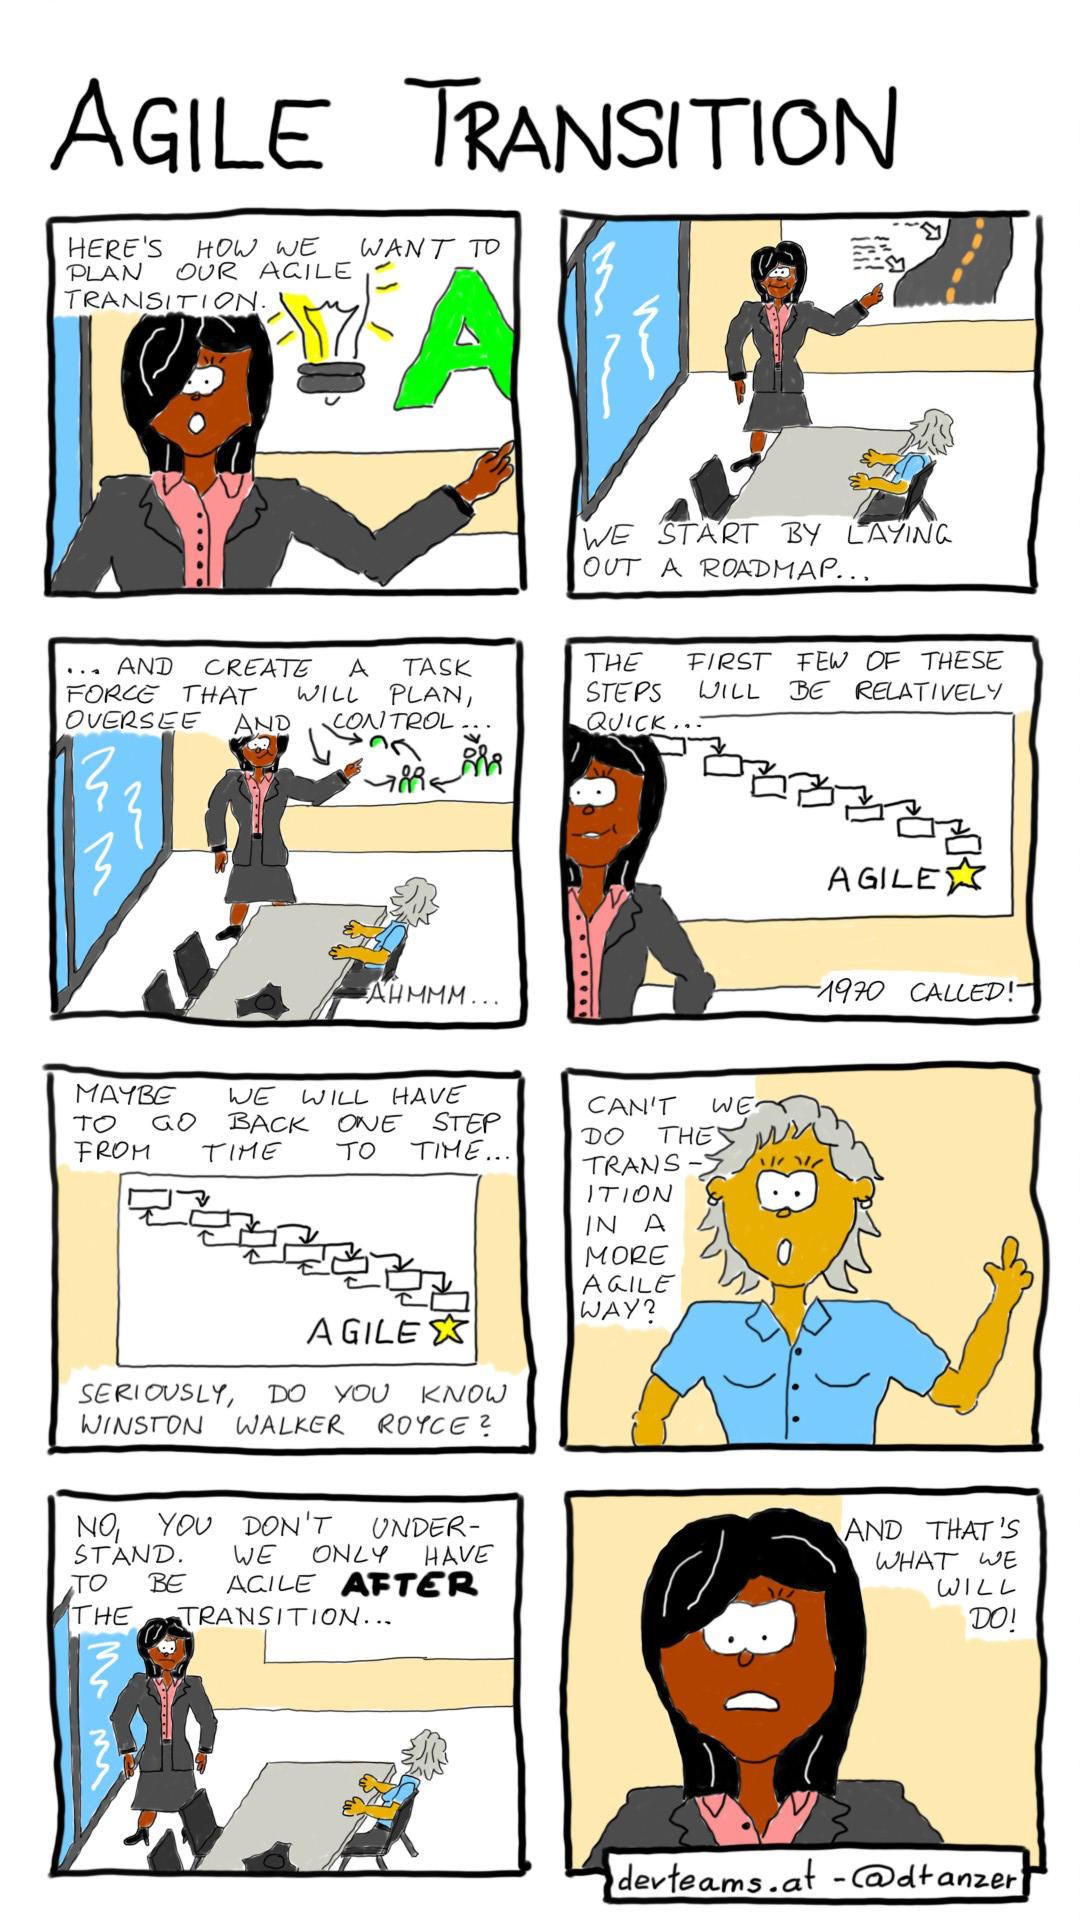 Comic about how to (not) start an agile transition. Transcript below the image.